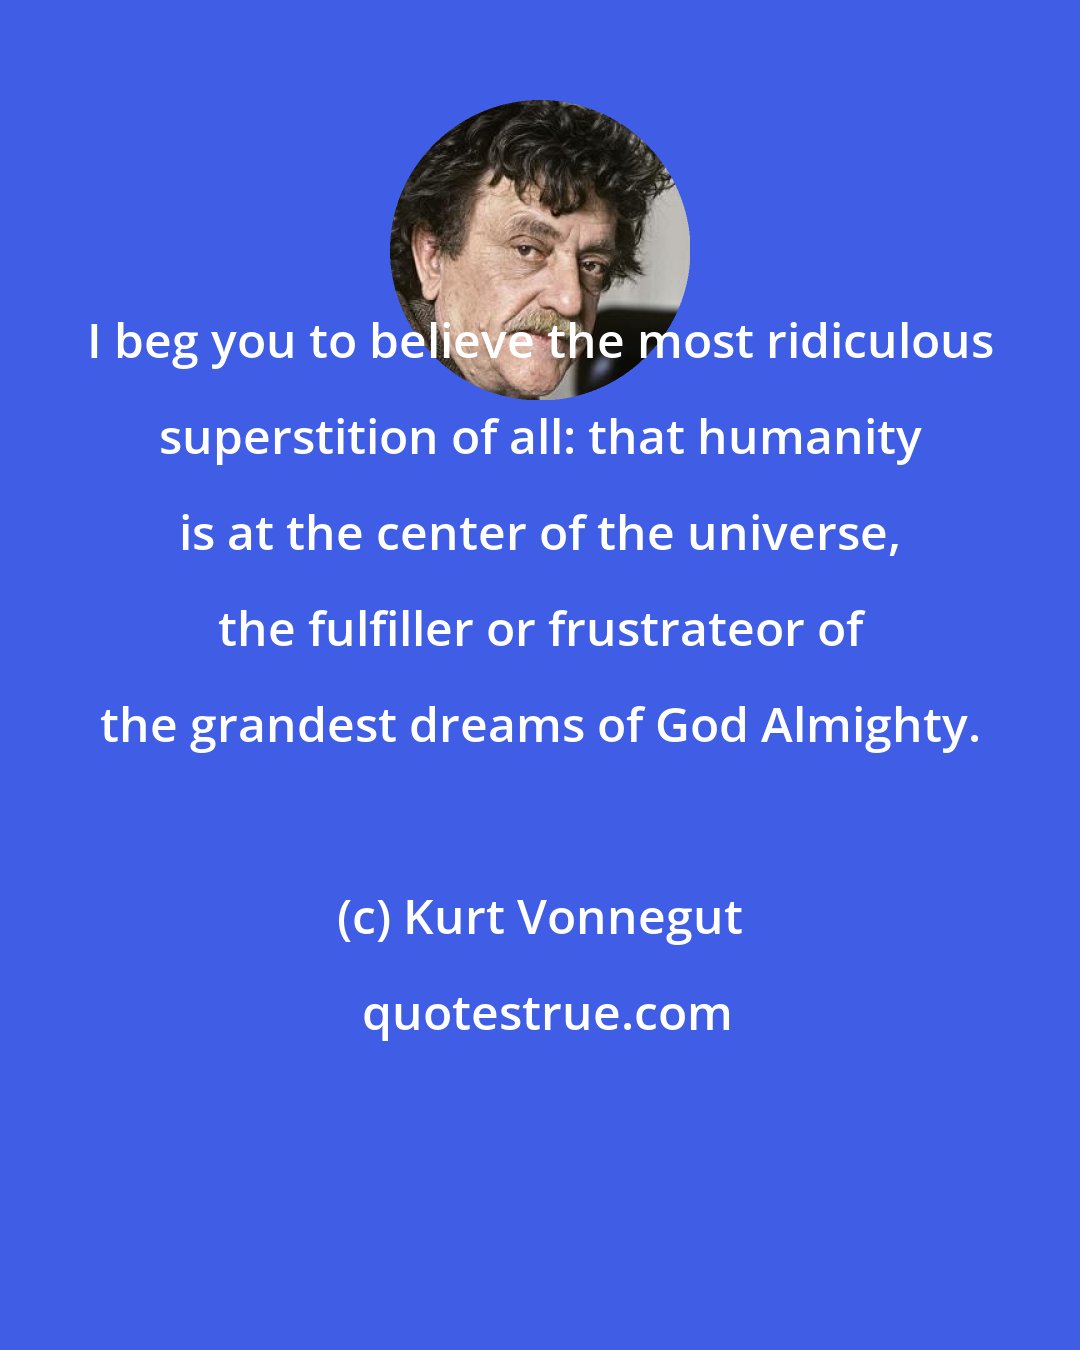 Kurt Vonnegut: I beg you to believe the most ridiculous superstition of all: that humanity is at the center of the universe, the fulfiller or frustrateor of the grandest dreams of God Almighty.